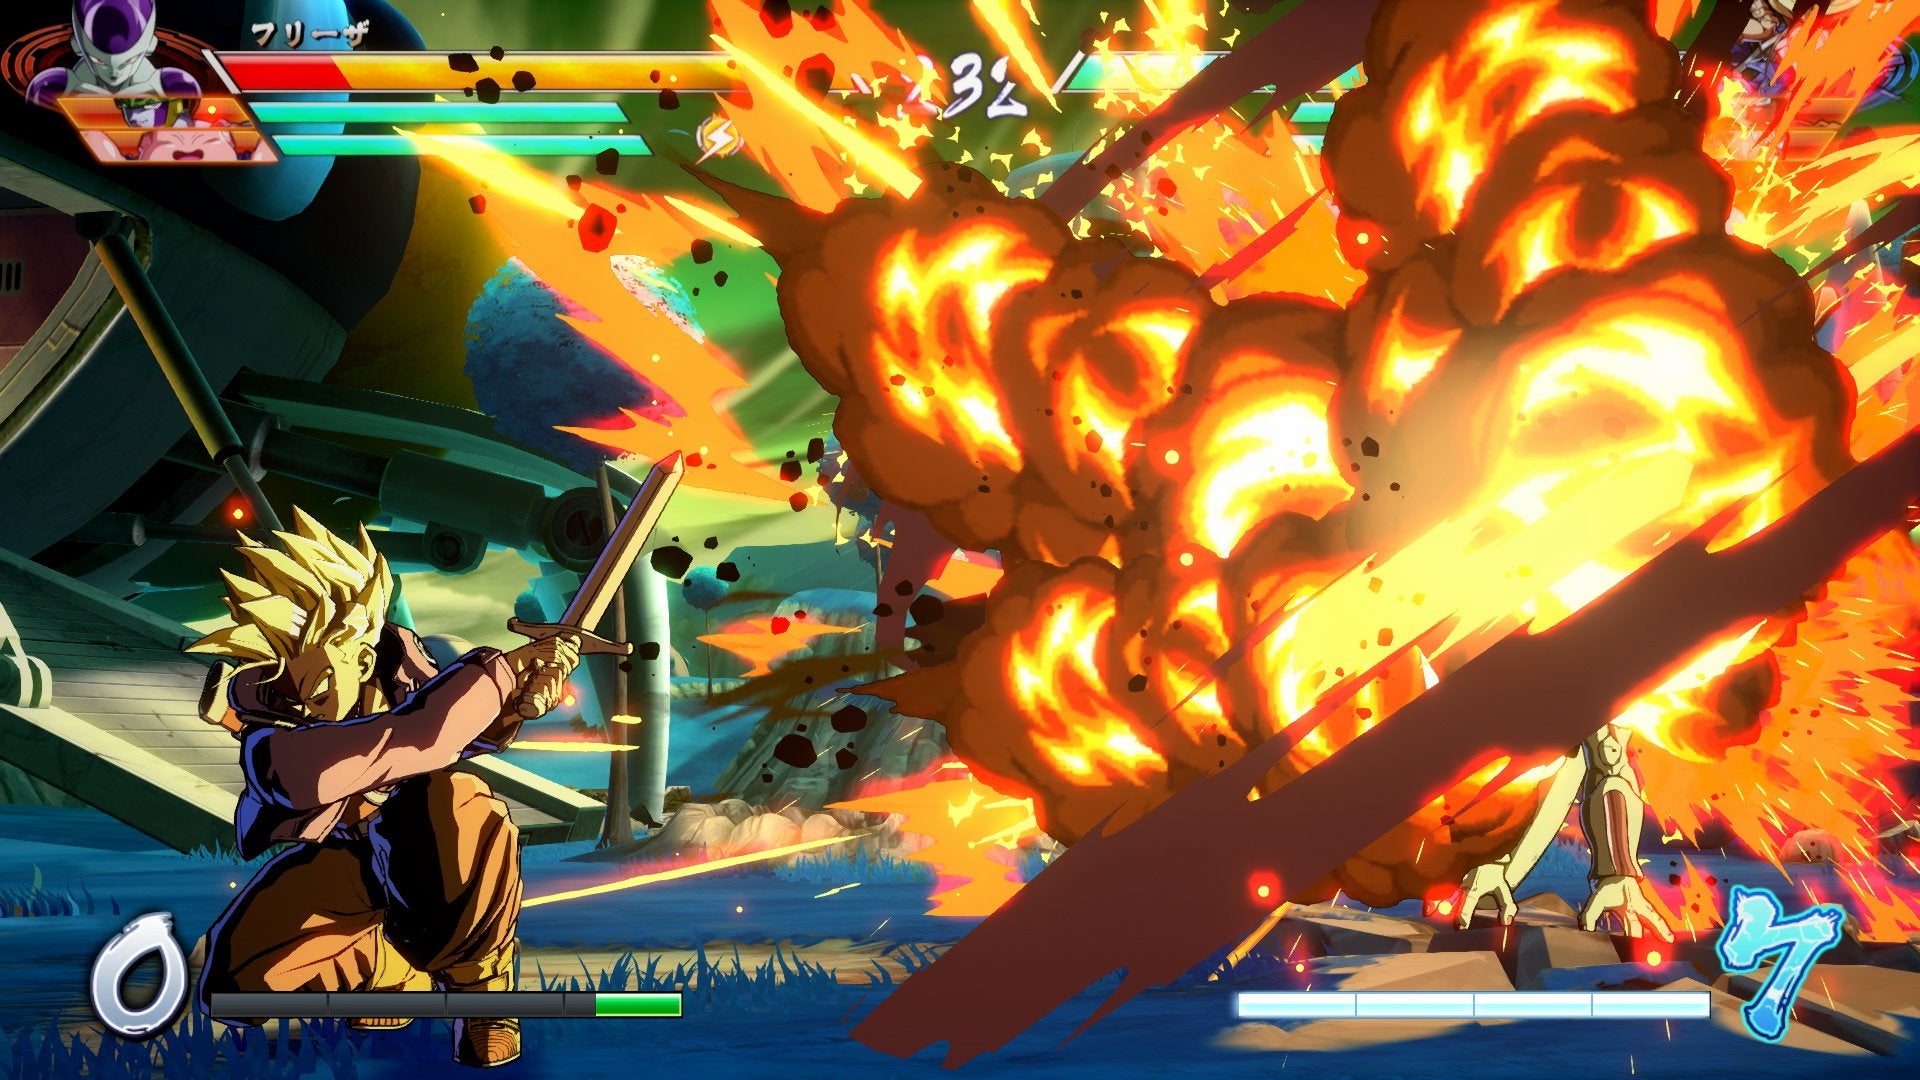 Image for This Dragon Ball FighterZ trailer gives us a proper glimpse at the game's plot